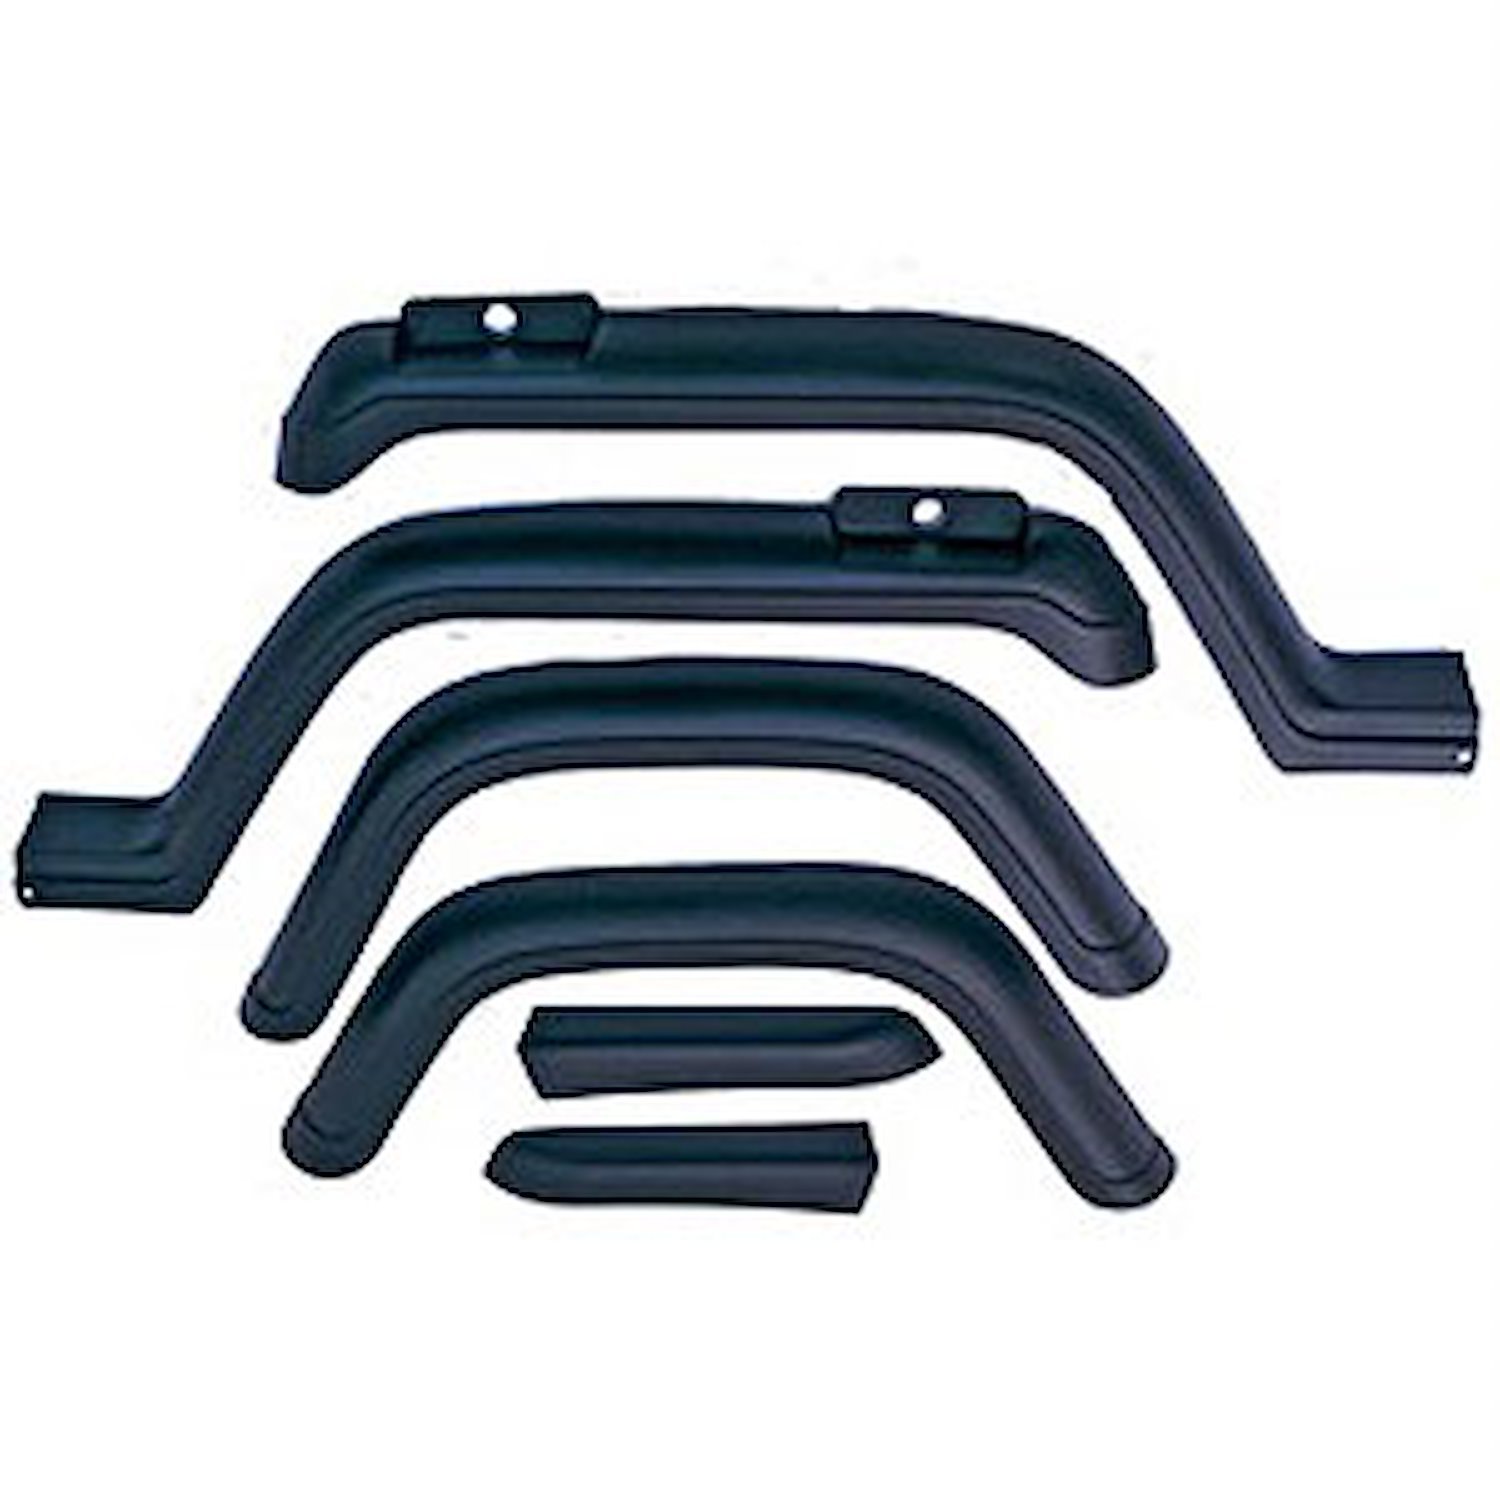 OE Style Fender Flare Kit for 1987-95 Jeep